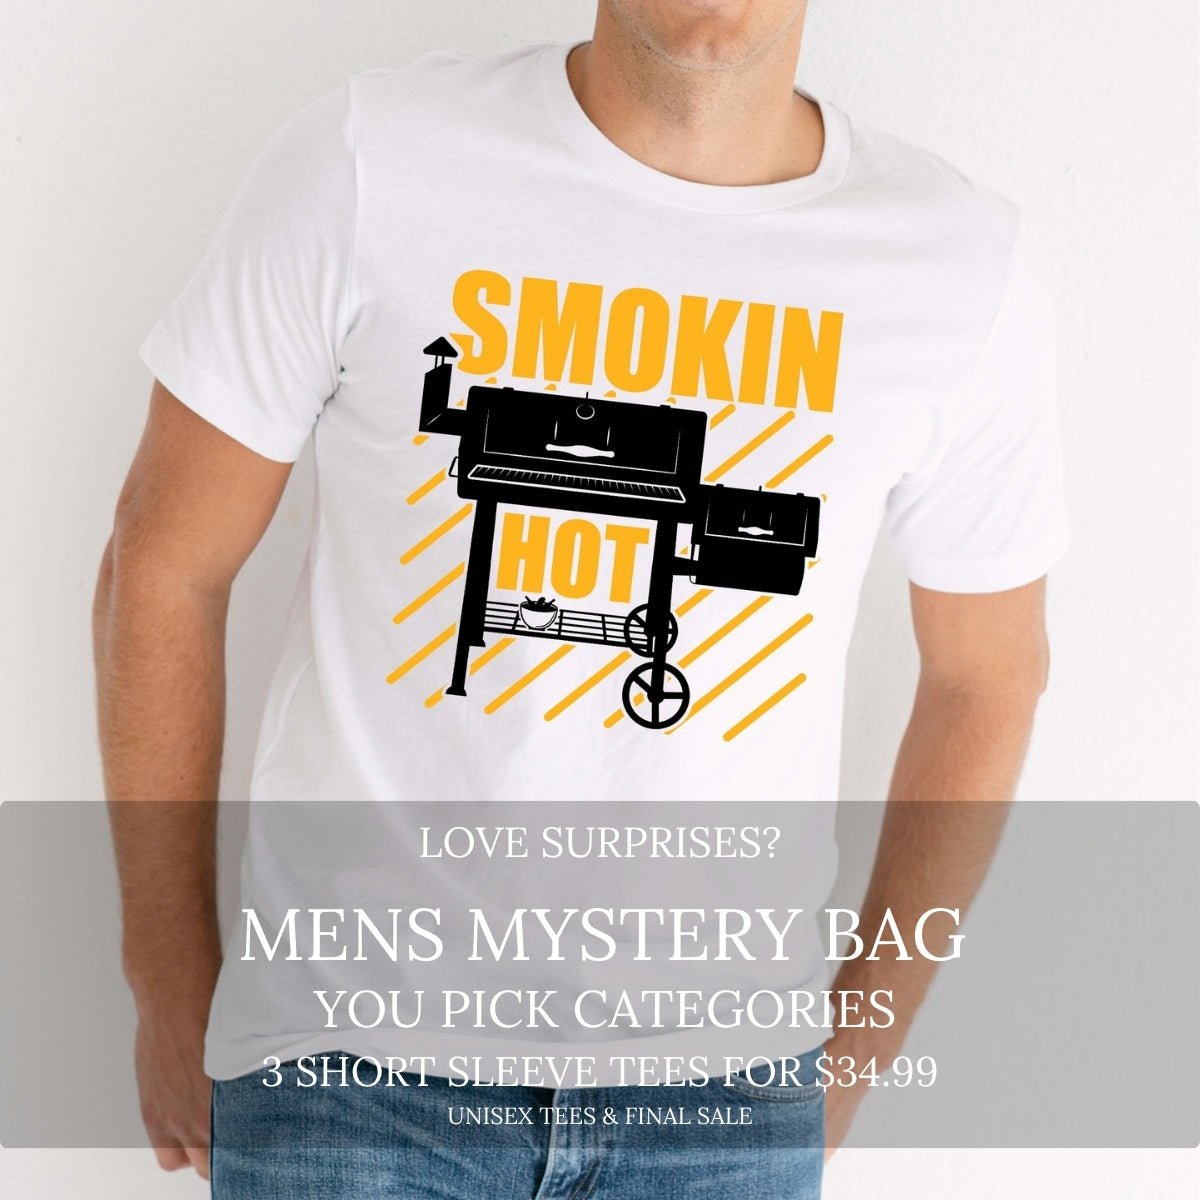 Men's Mystery Graphic Grab Bag - Limeberry Designs